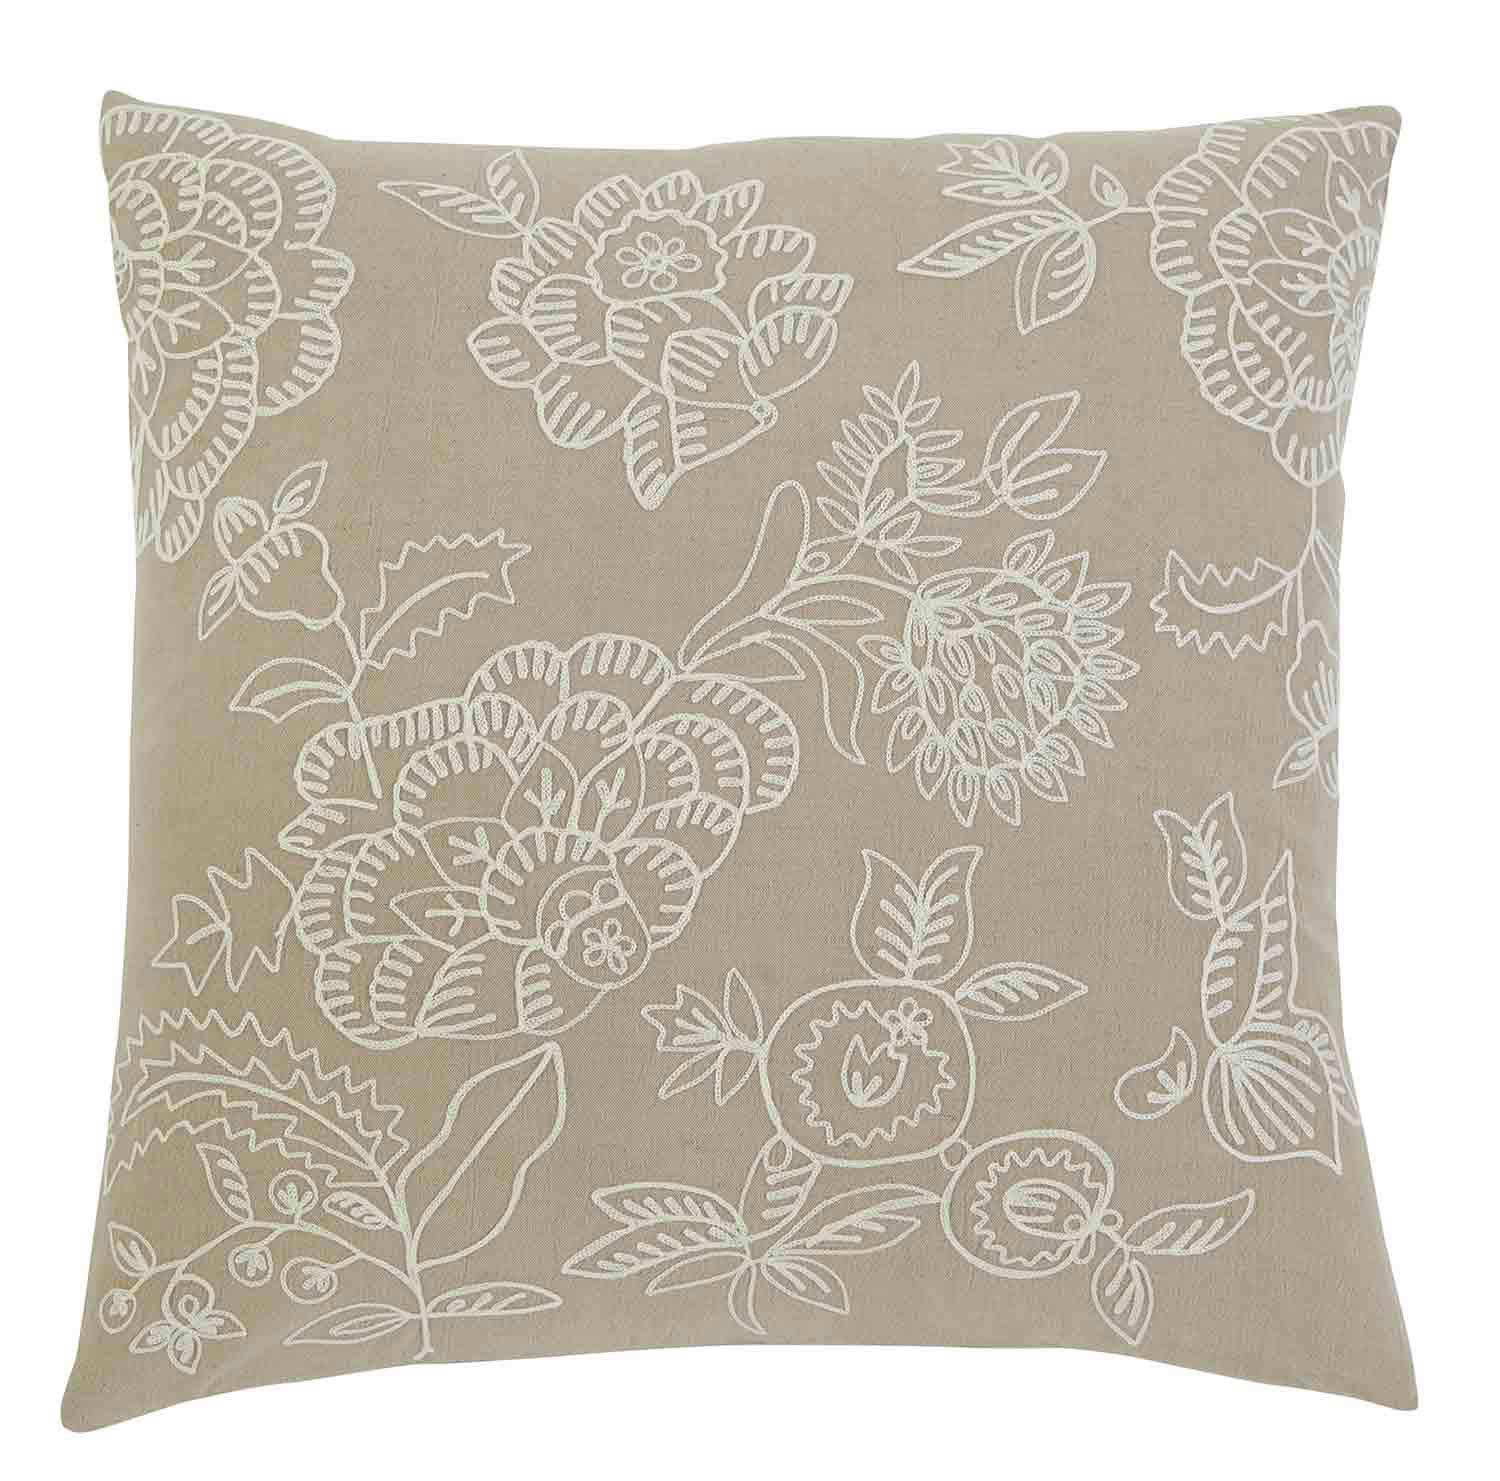 Ashley Embroidered Pillow Cover - Set of 4 - Natural